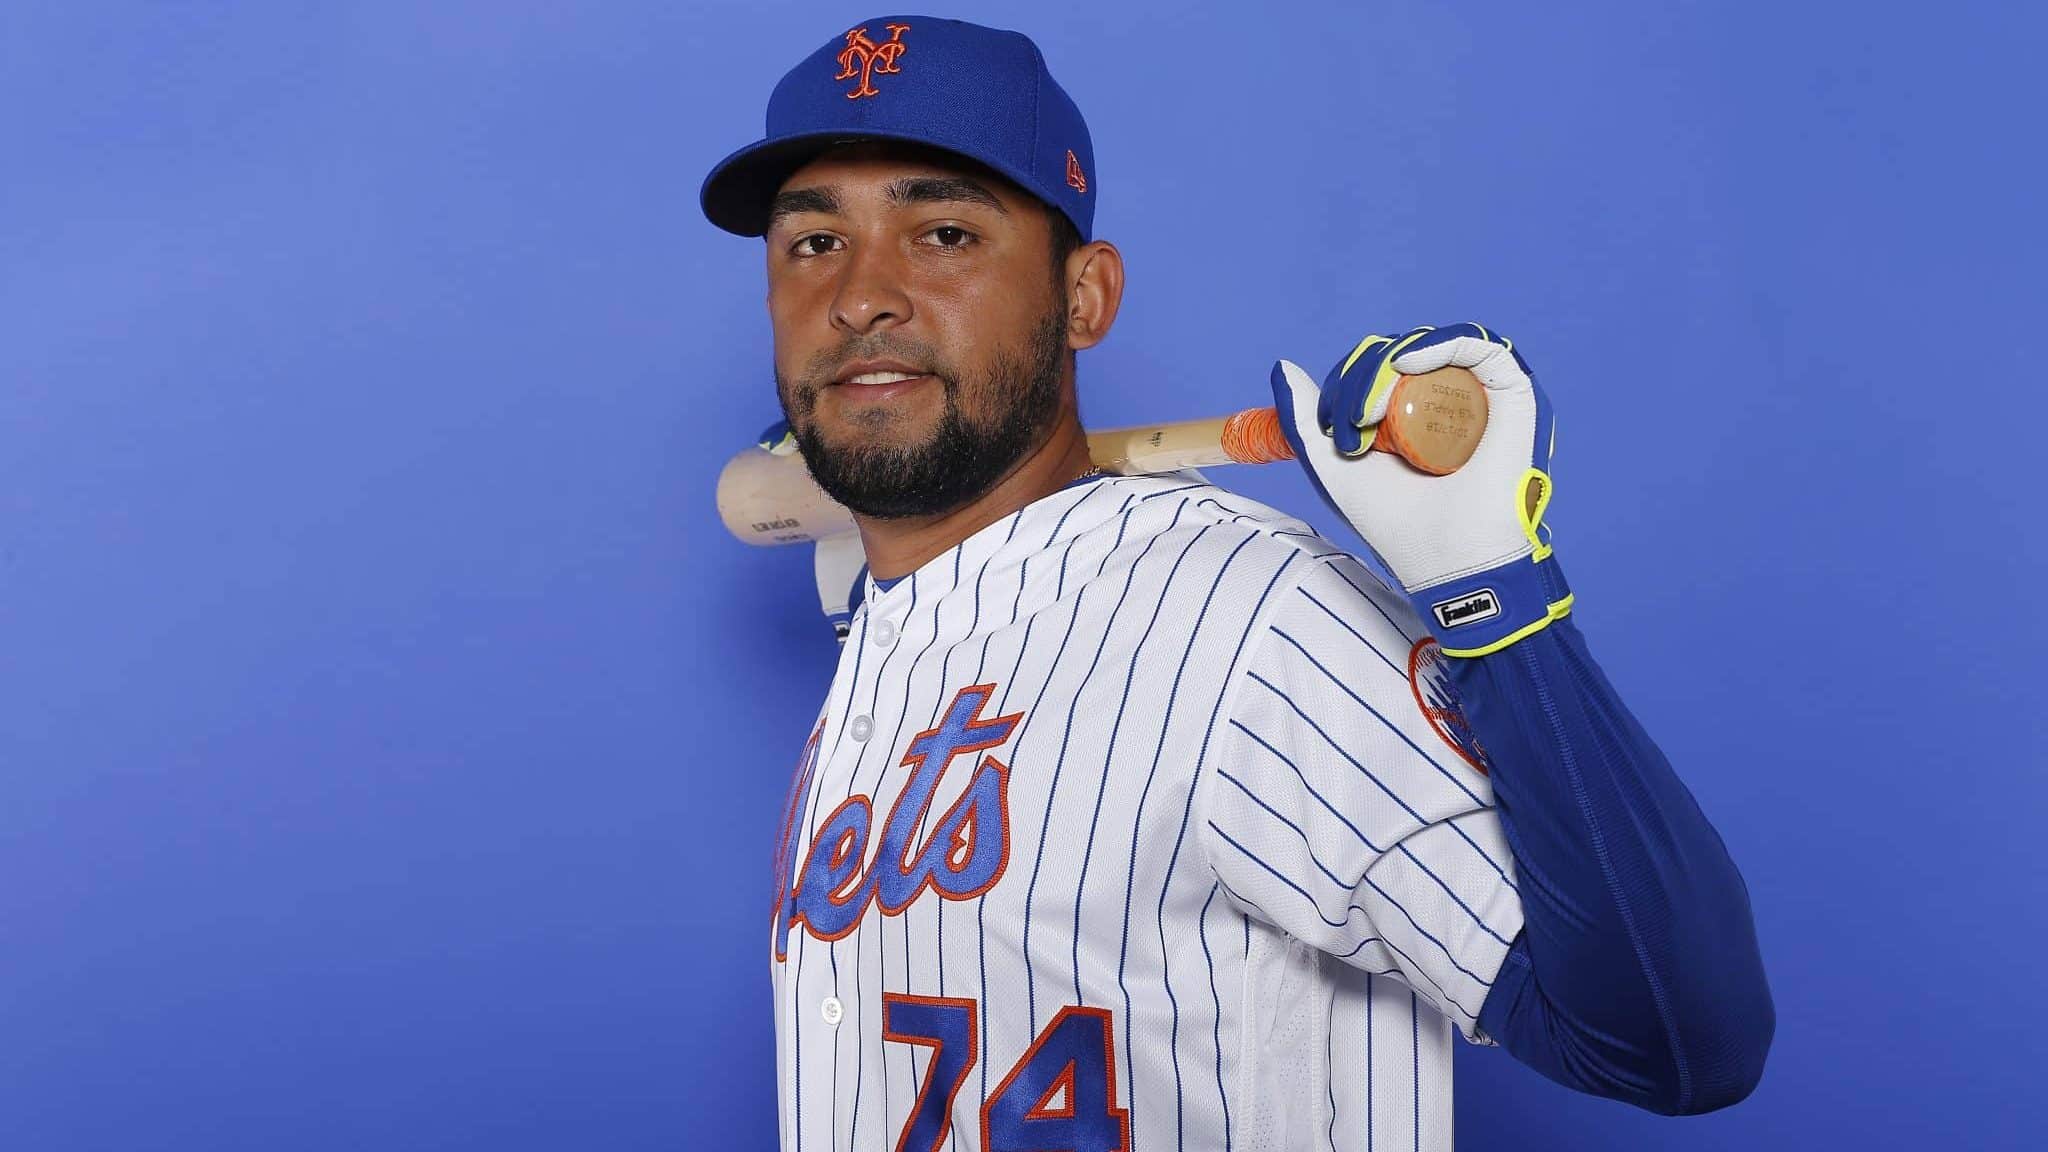 PORT ST. LUCIE, FLORIDA - FEBRUARY 21: Ali Sanchez #74 of the New York Mets poses for a photo on Photo Day at First Data Field on February 21, 2019 in Port St. Lucie, Florida.